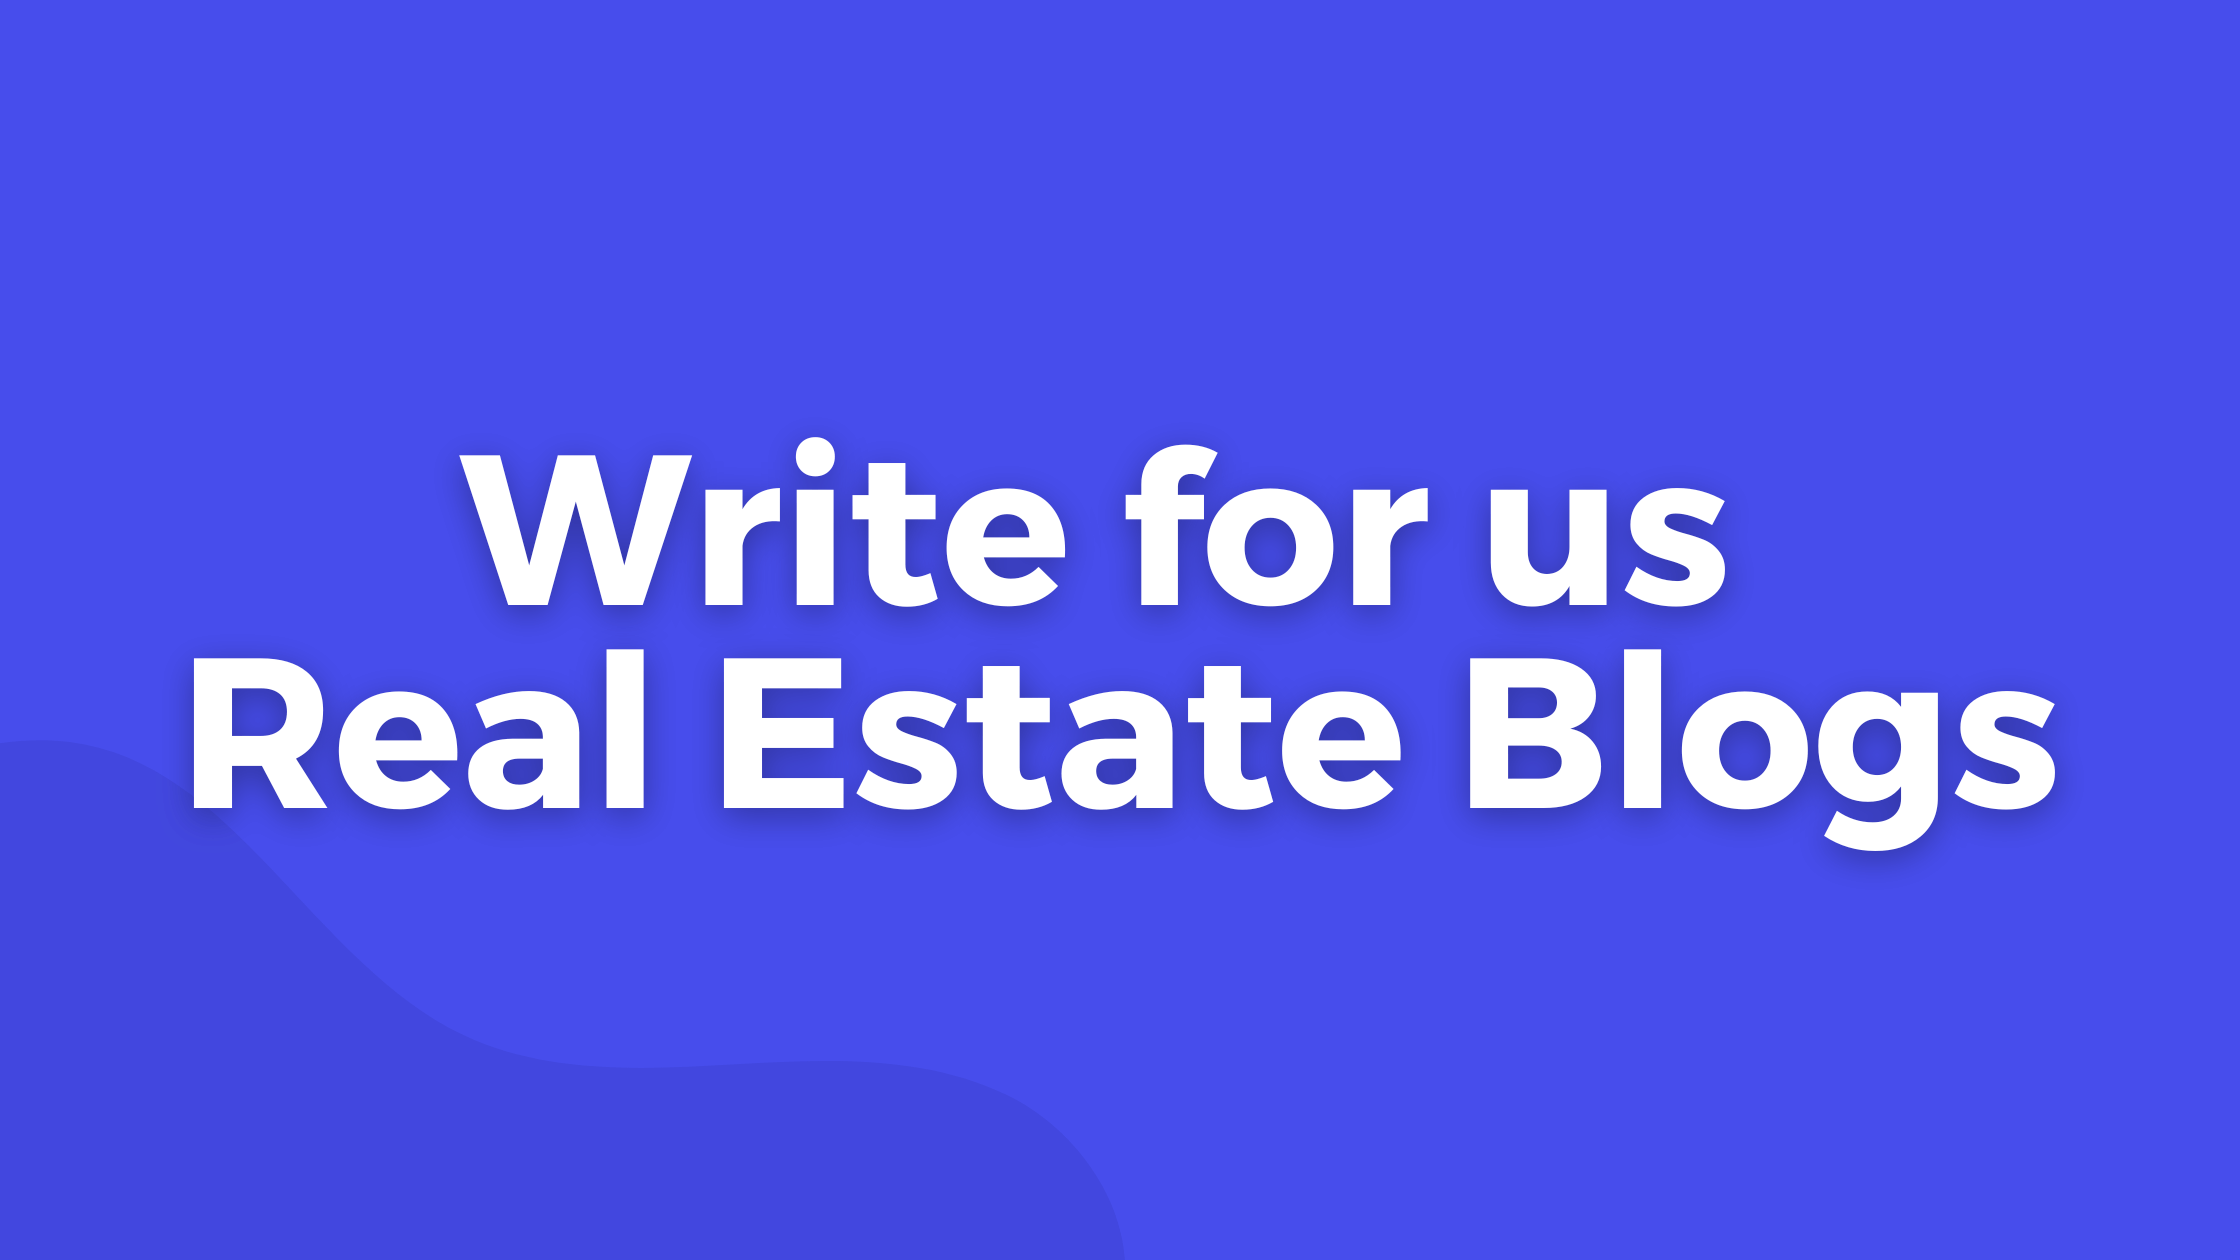 Write for us Real Estate Blogs